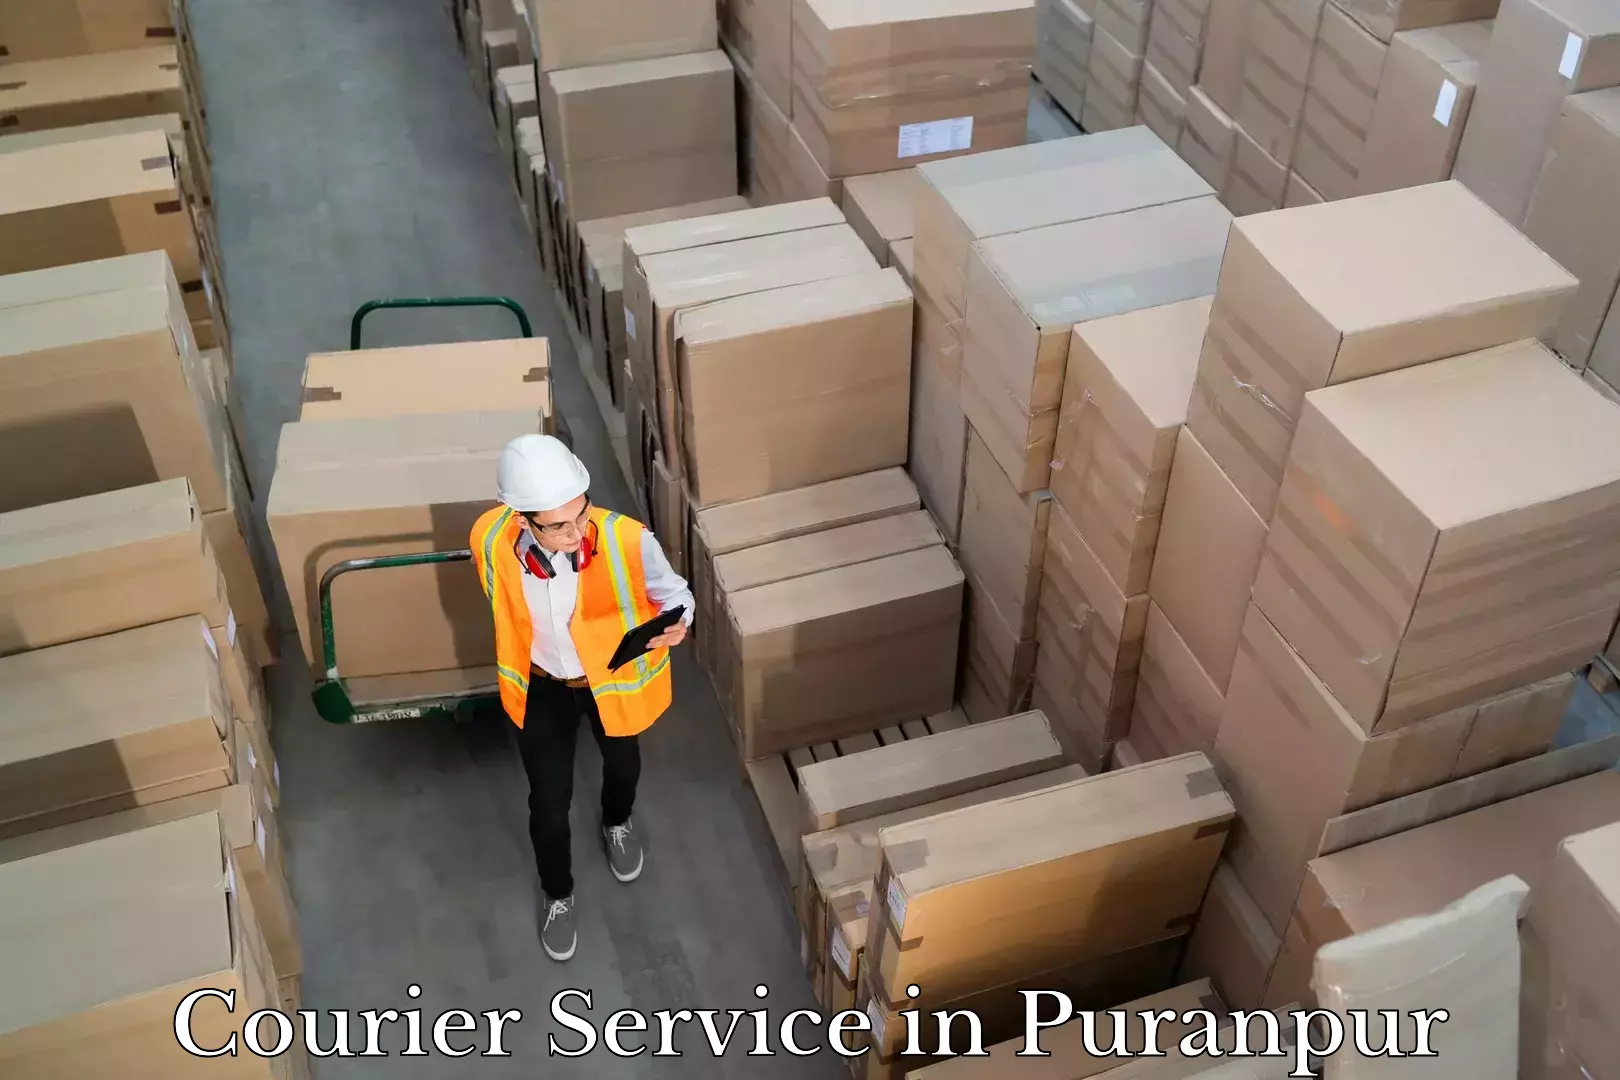 24-hour delivery options in Puranpur